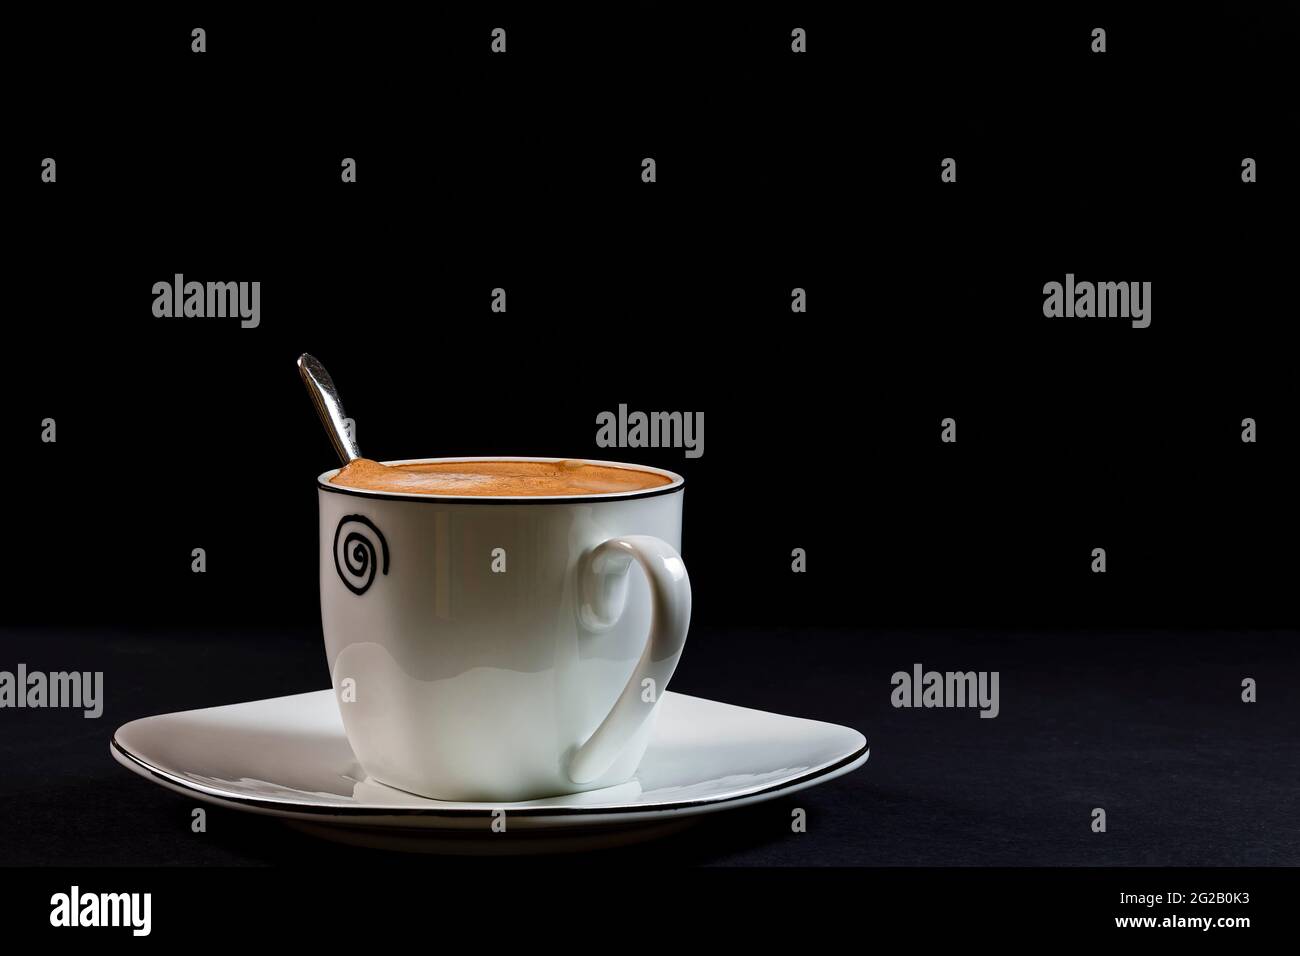 Coffee with milk in a decorative porcelain cup and with a spoon It is a horizontal photo taken on a black background with artificial light in a studio Stock Photo